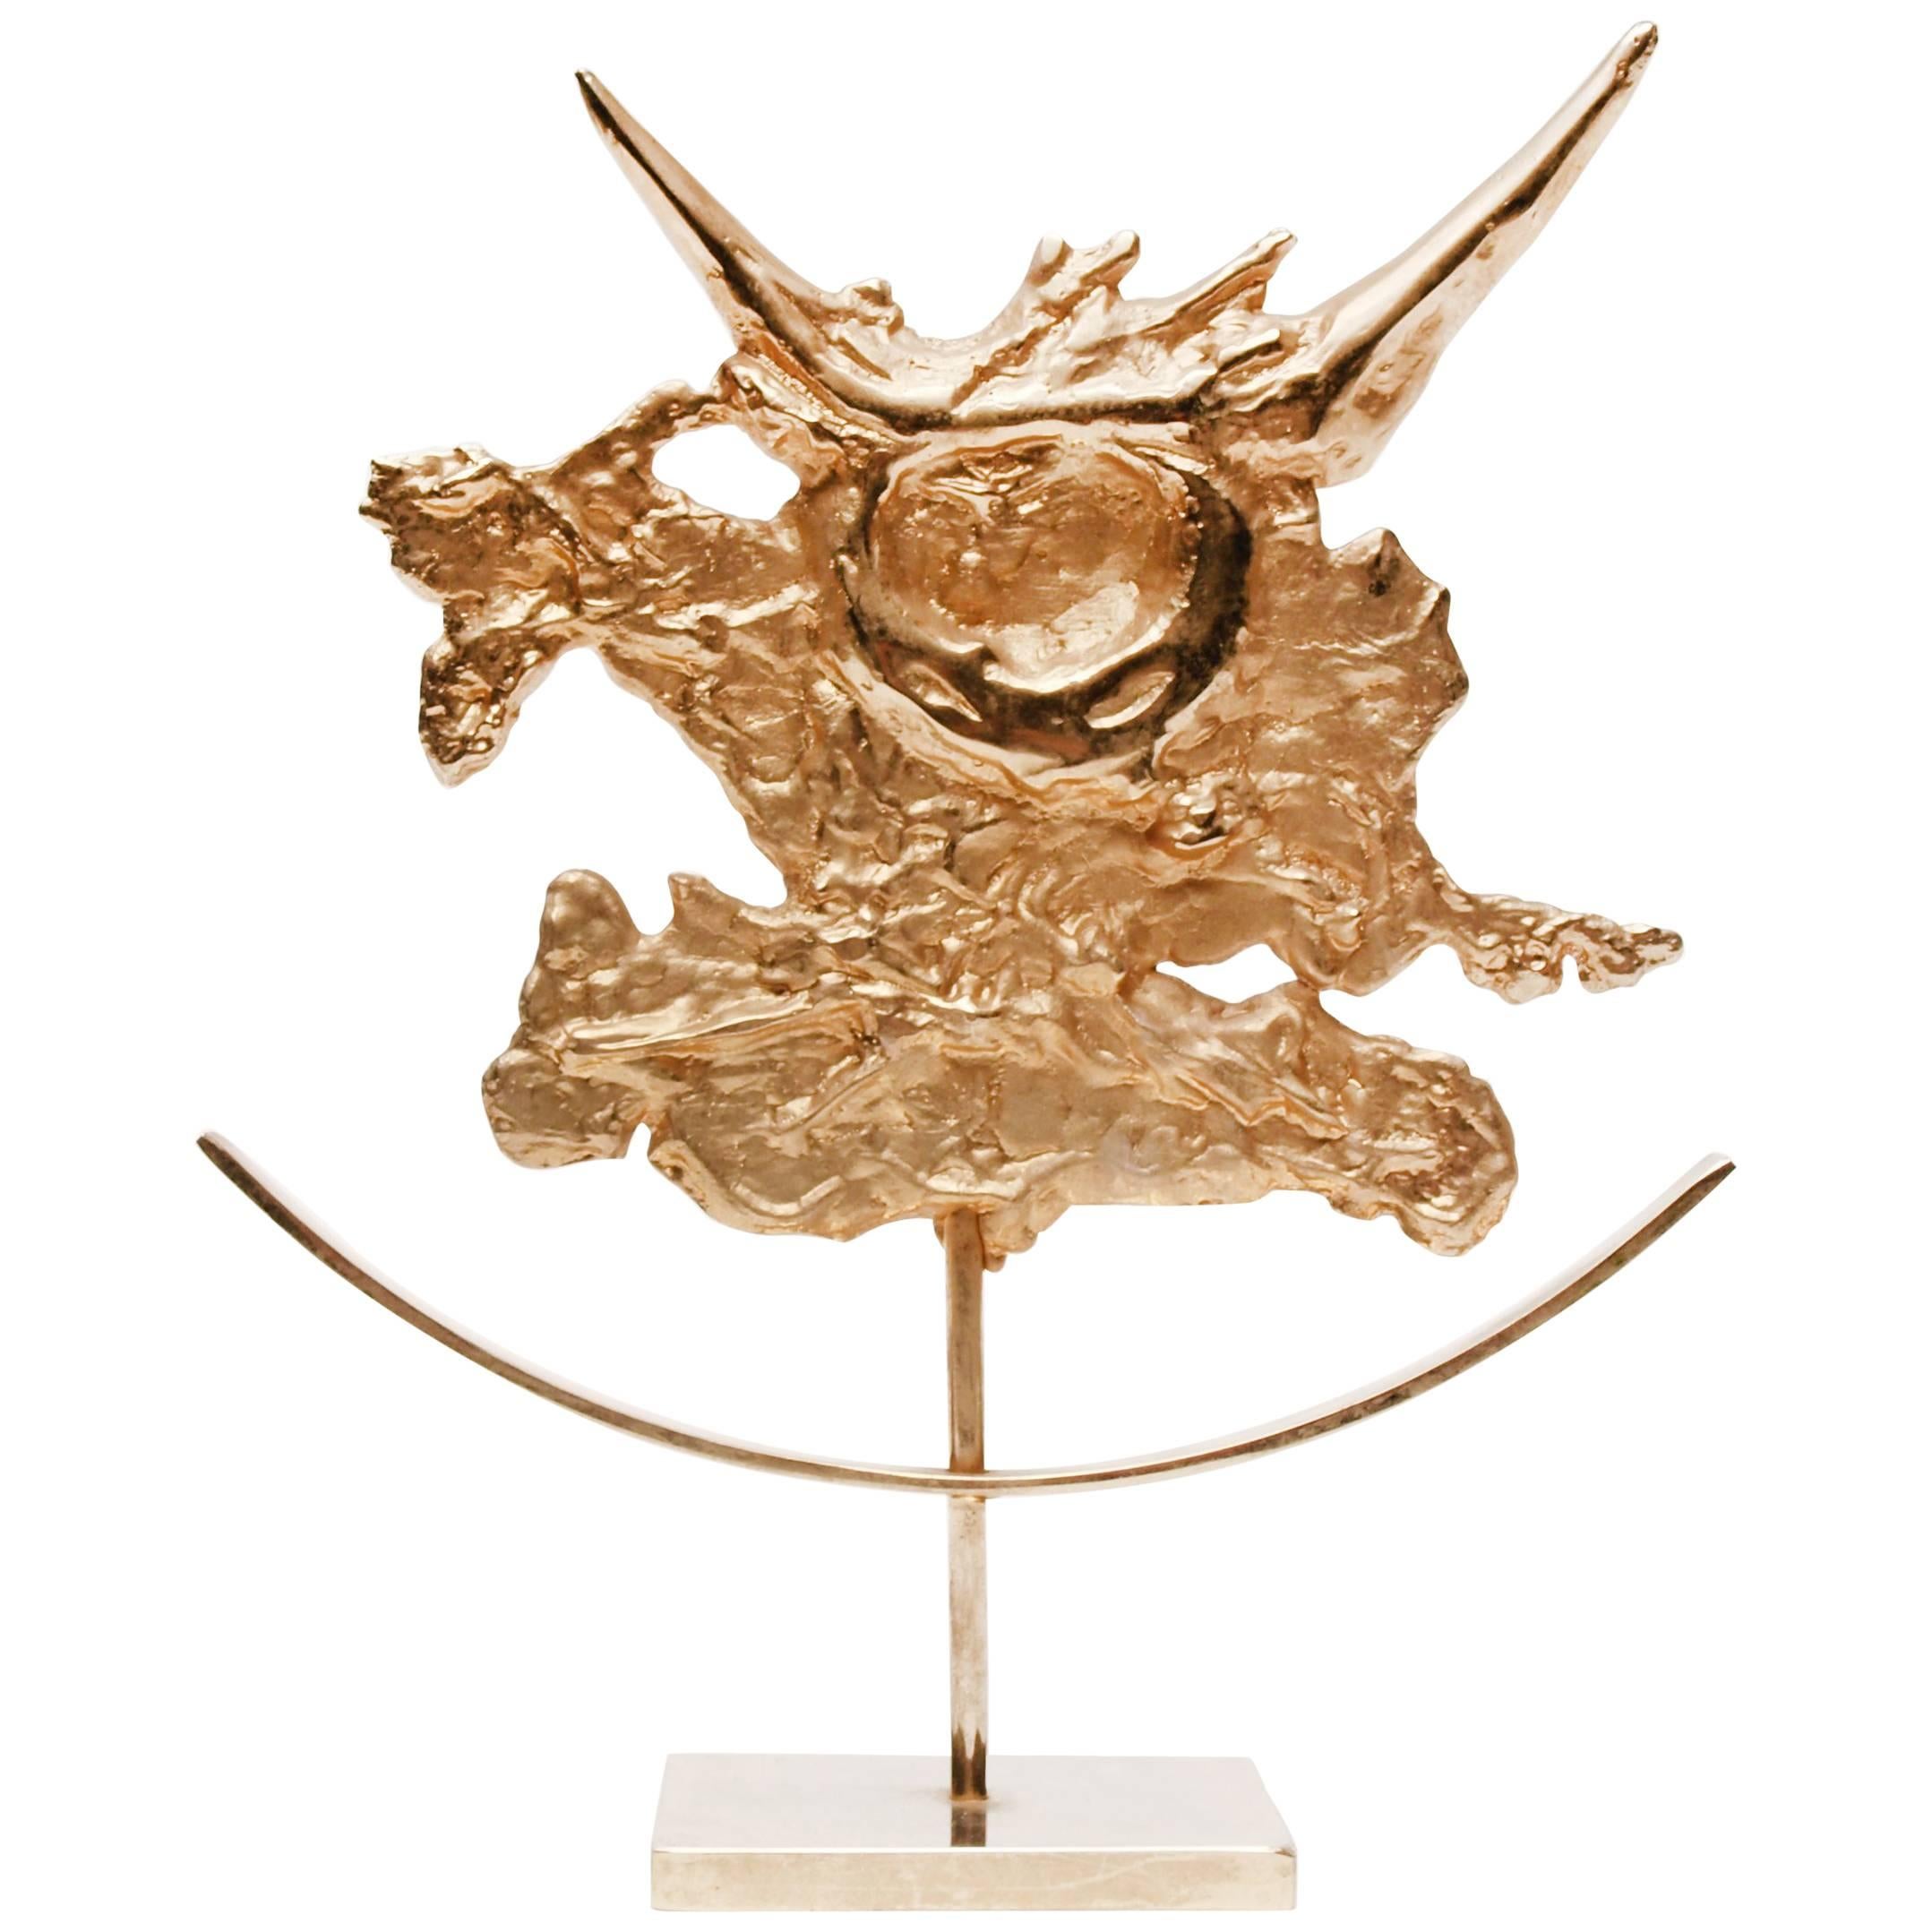 Gilded Taurus Zodiac Sculpture by Philippe Cheverny, 1970s